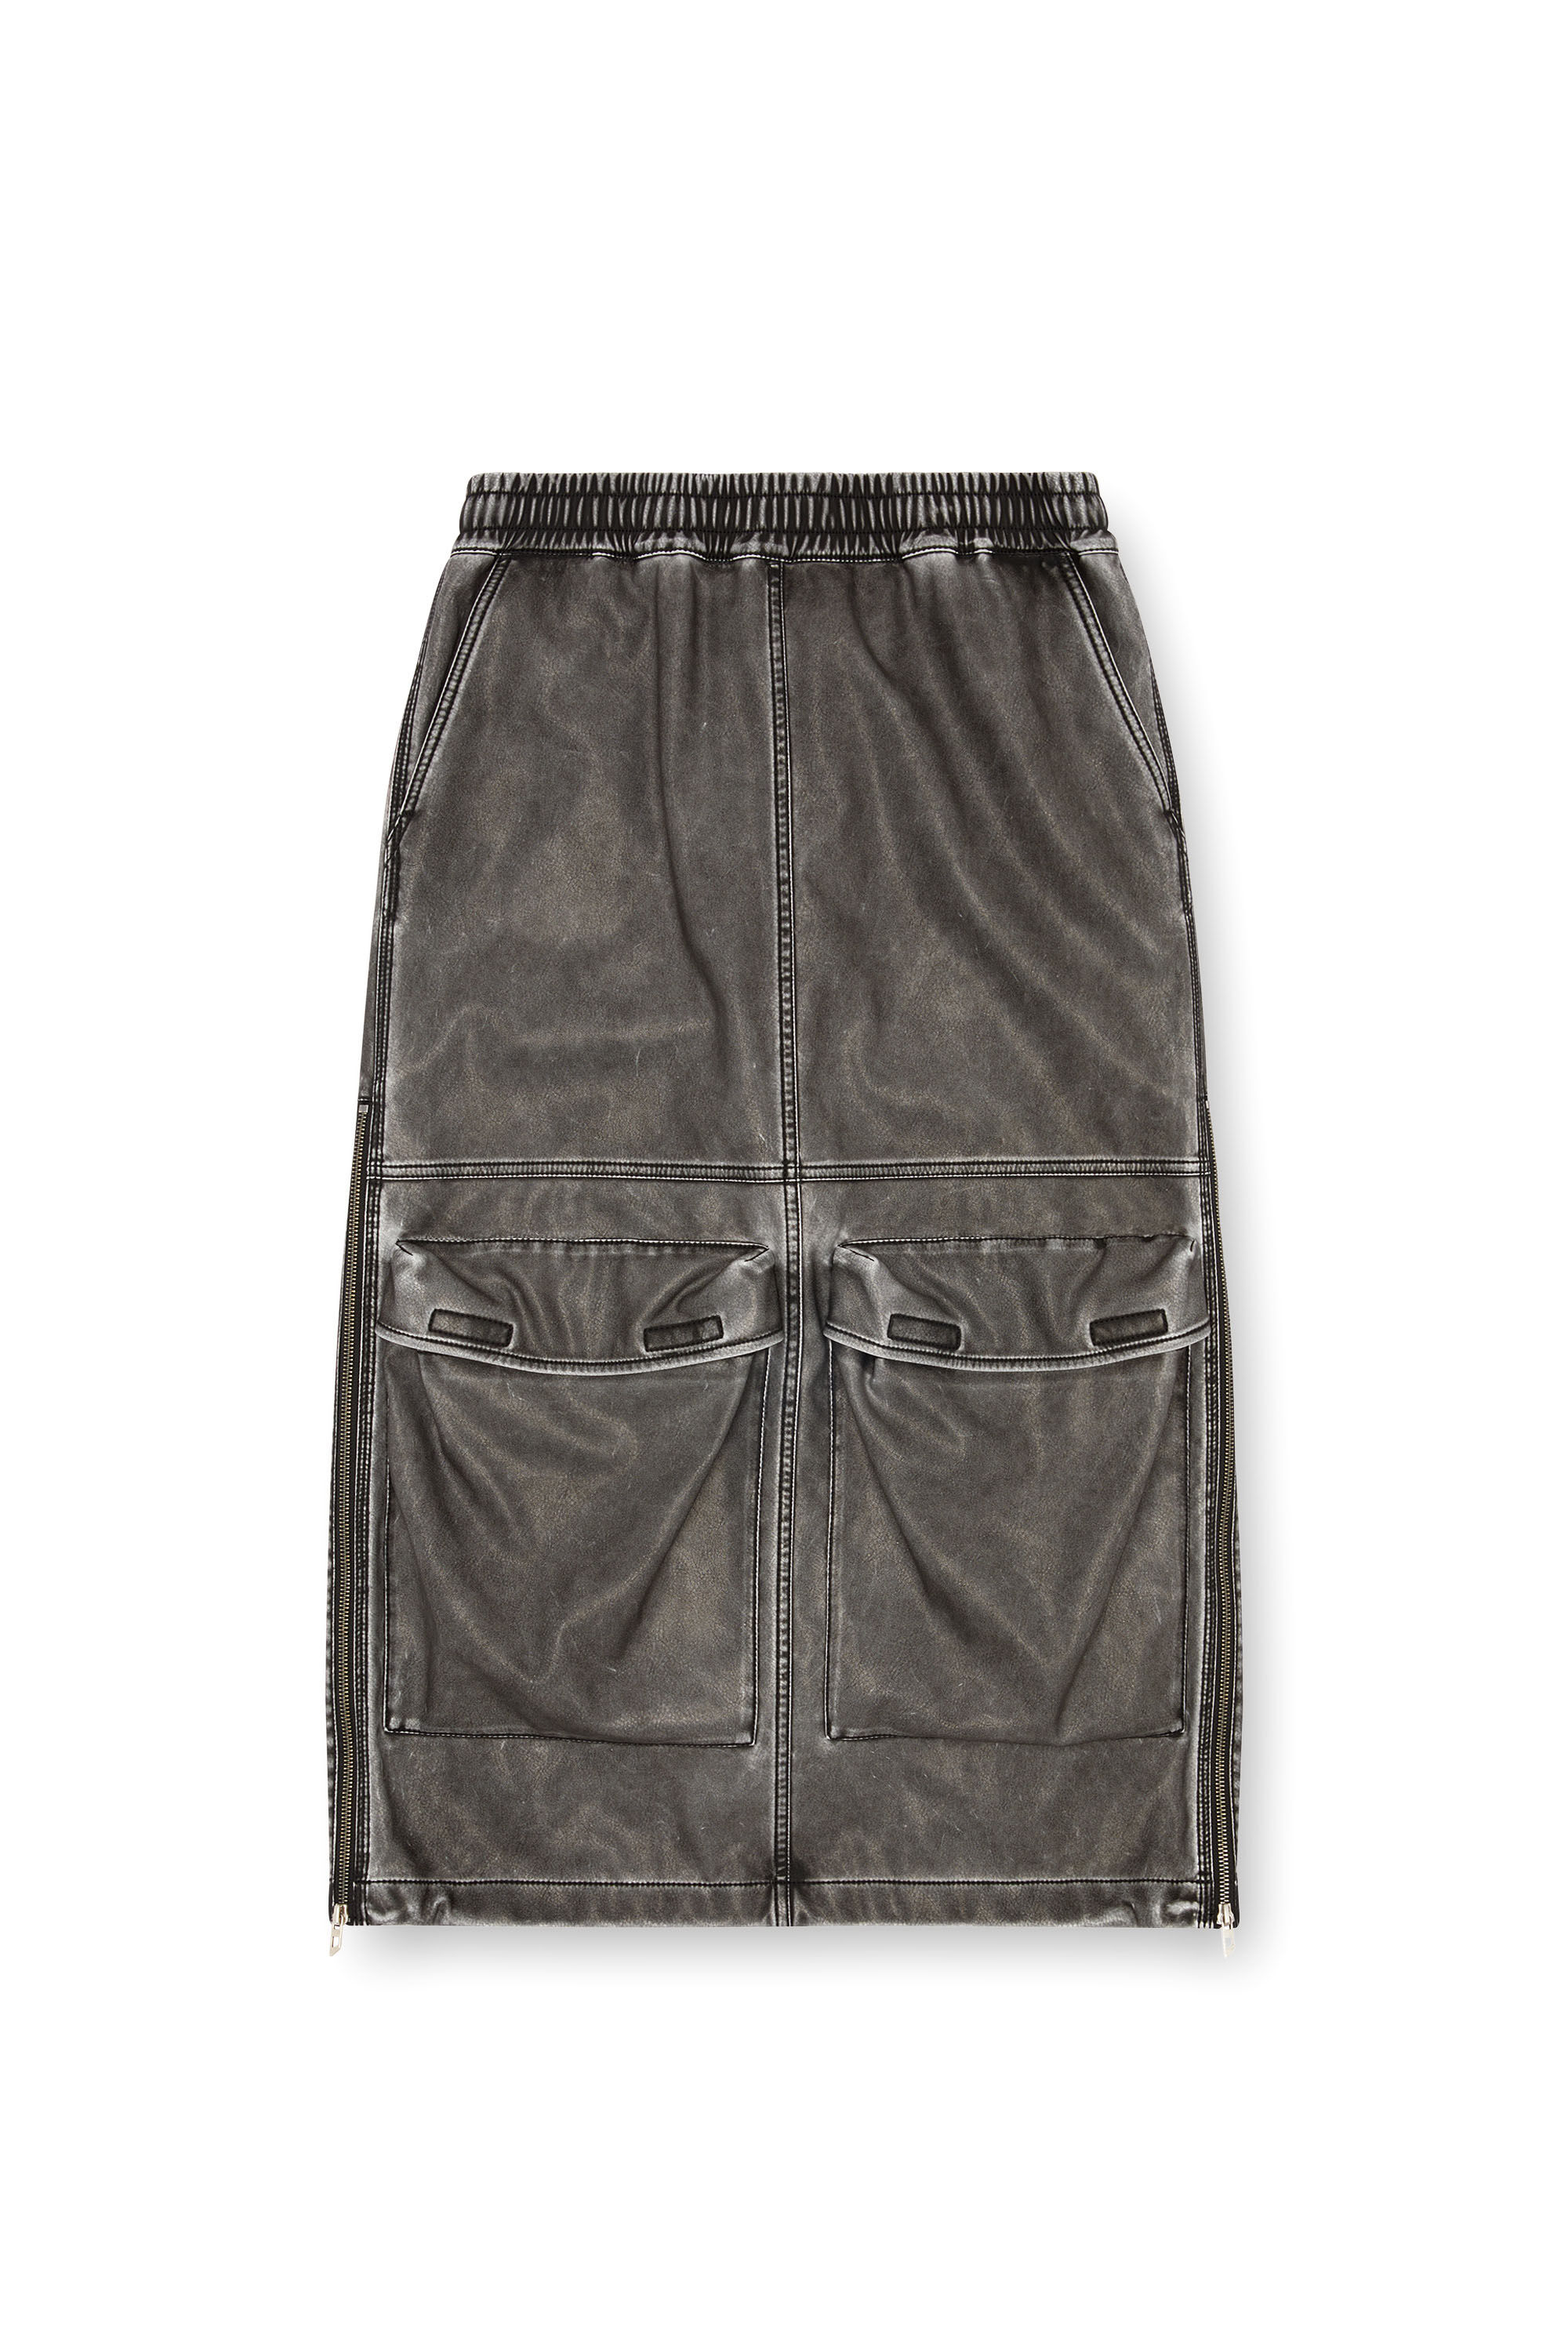 Diesel - O-DYSSEY-P1, Woman Long skirt in washed tech fabric in Grey - Image 2